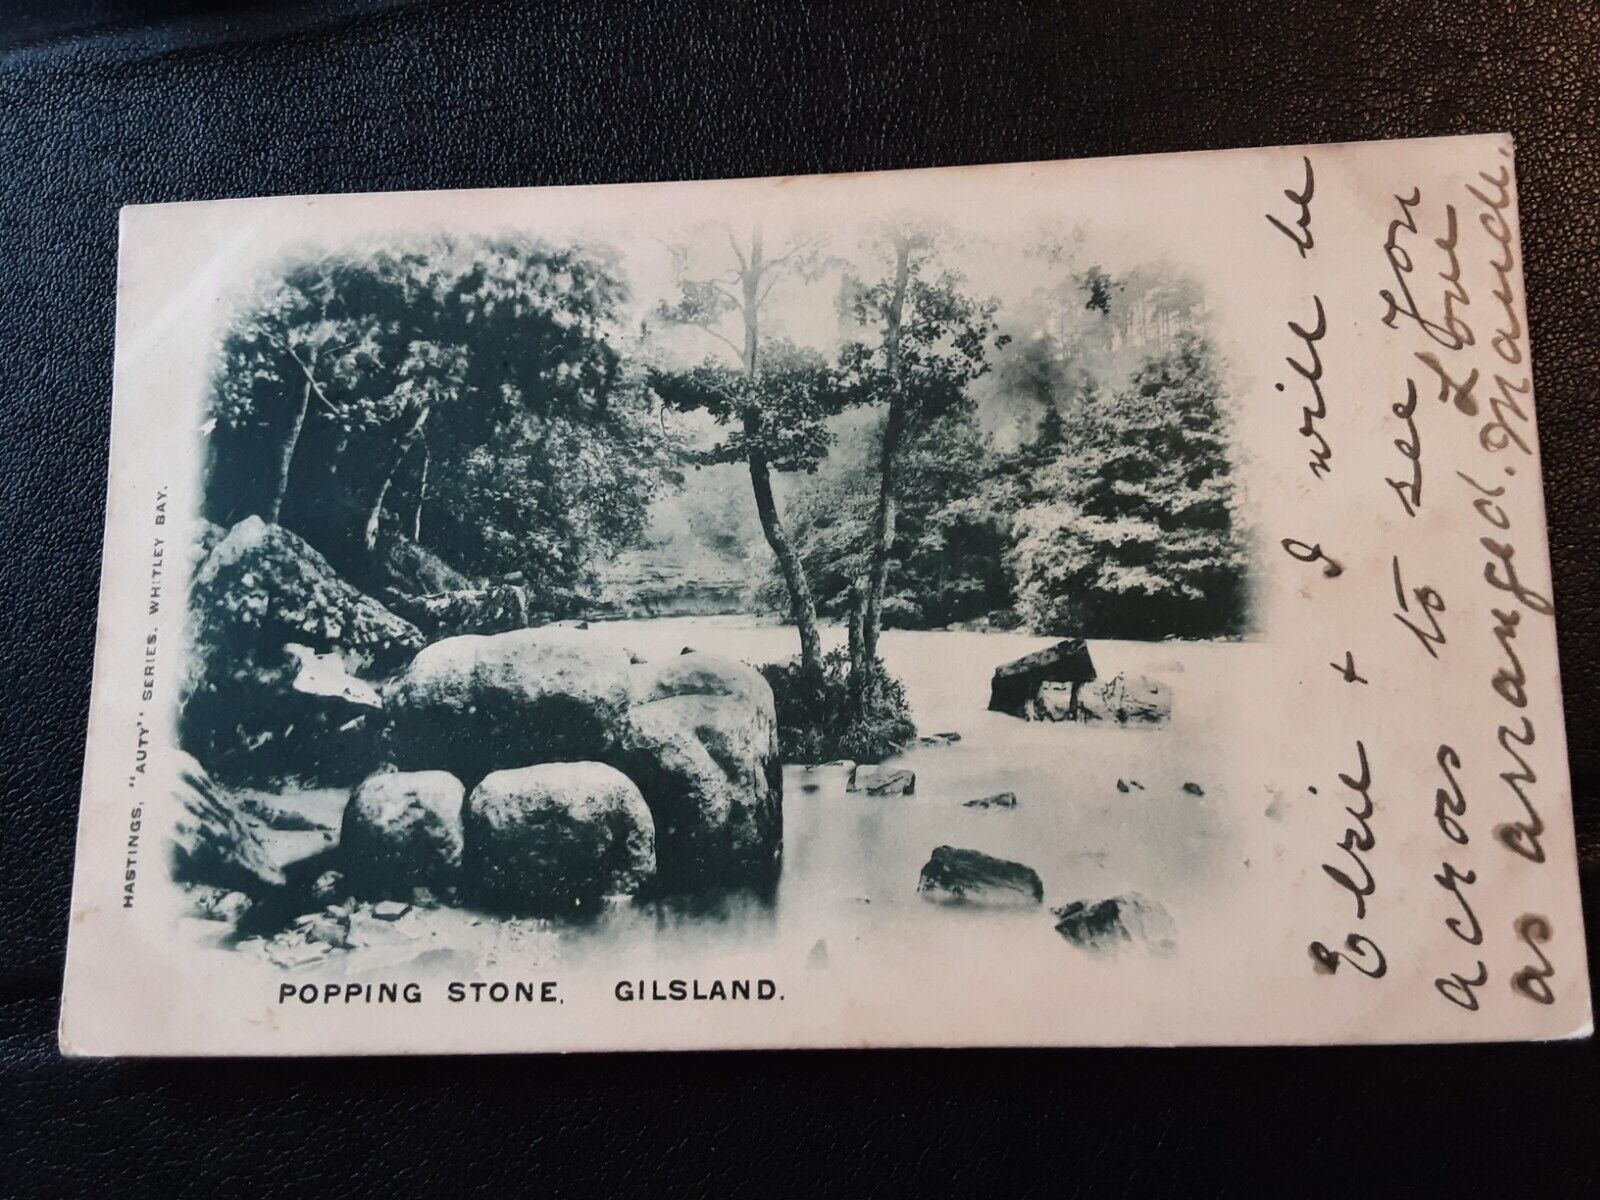 House Clearance - Old Auty series service of Popping Stone, Gilsland, Northumberland posted 1902